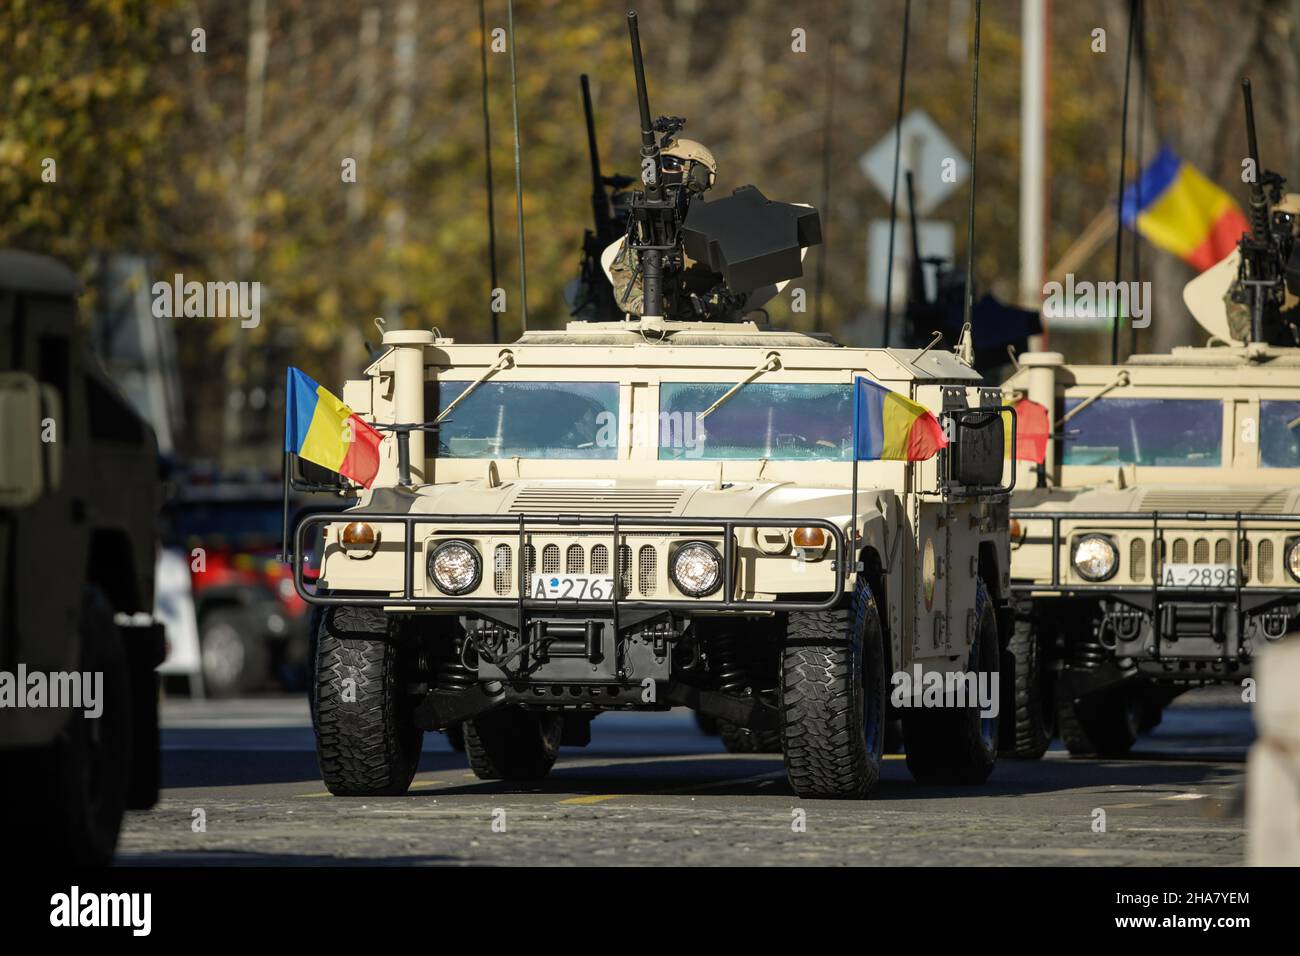 Bucharest, Romania - December 01, 2021: Romanian Army High Mobility Multipurpose Wheeled Vehicle (HMMWV, colloquial Humvee) during the National day mi Stock Photo